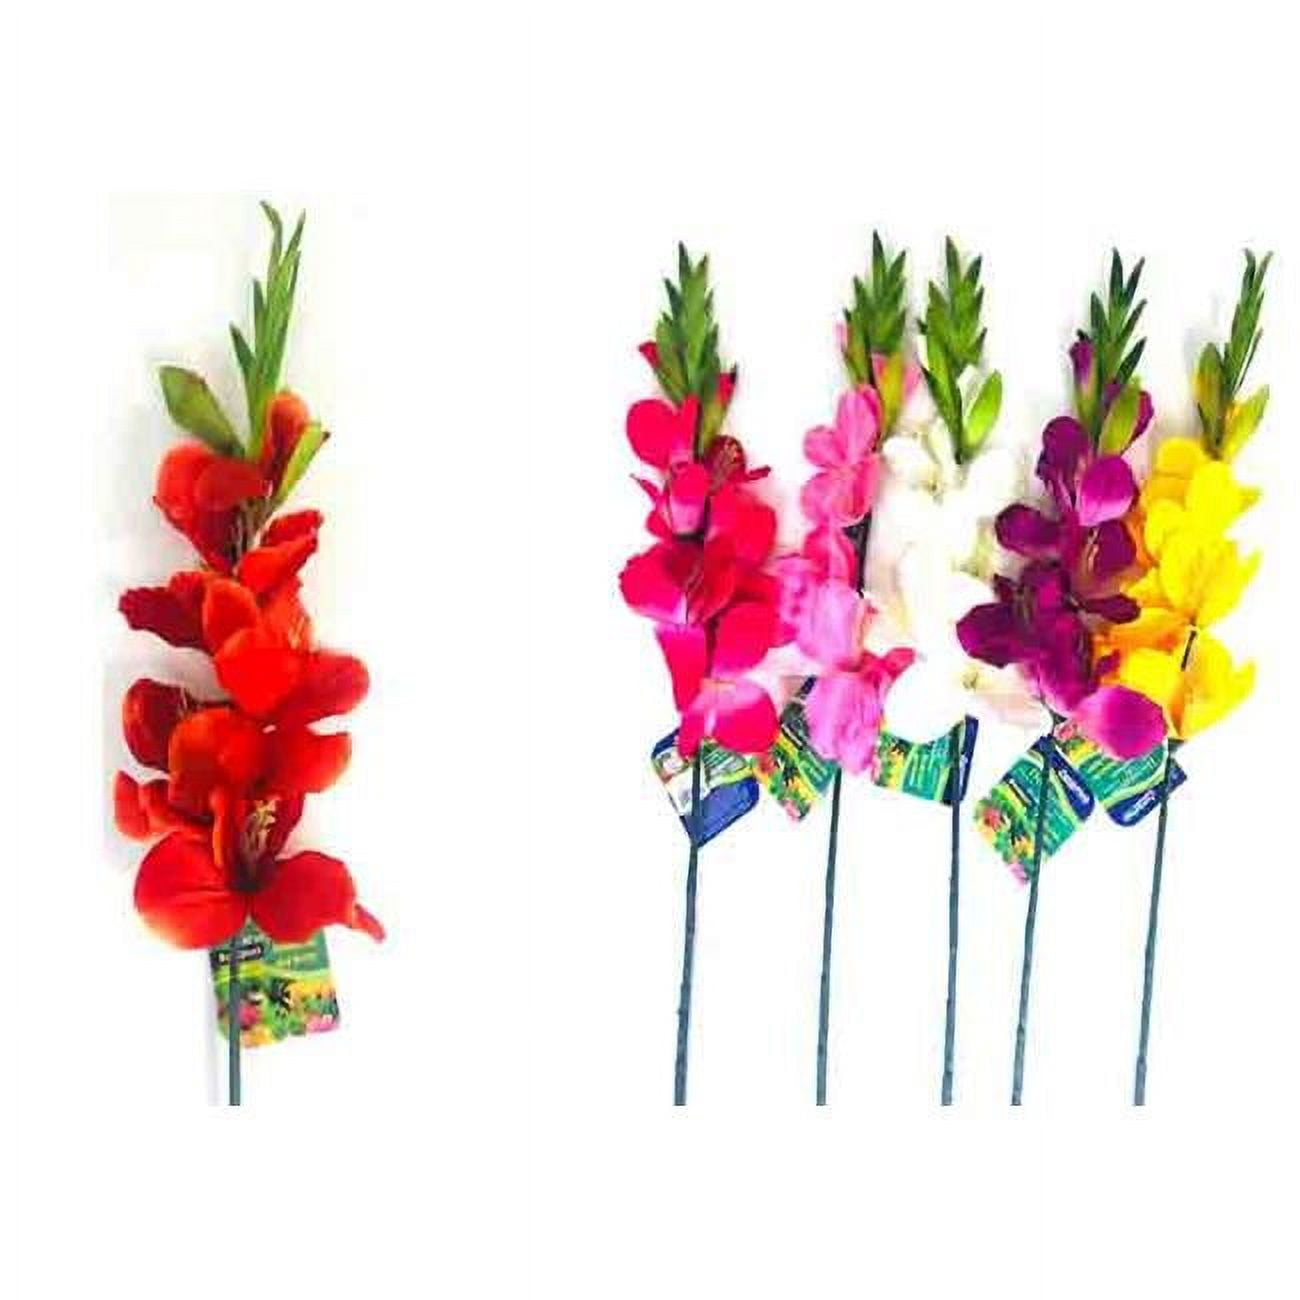 Picture of FamilyMaid 27702 76 cm Flo Lily 6 Flower with 2 Bud, 6 Assorted Color